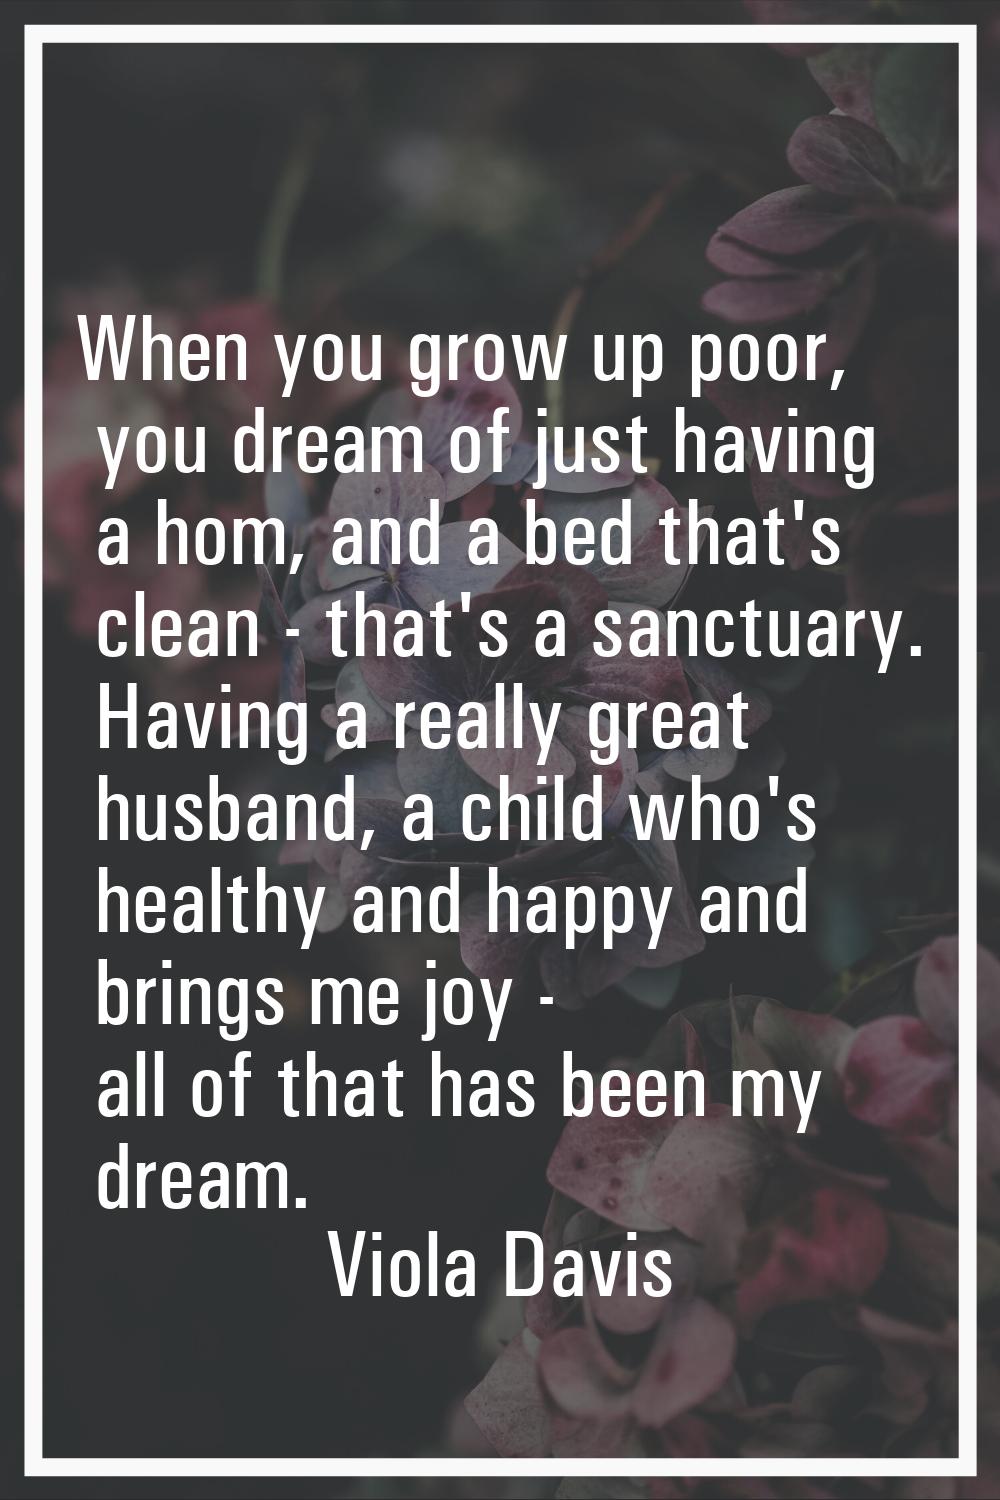 When you grow up poor, you dream of just having a hom, and a bed that's clean - that's a sanctuary.